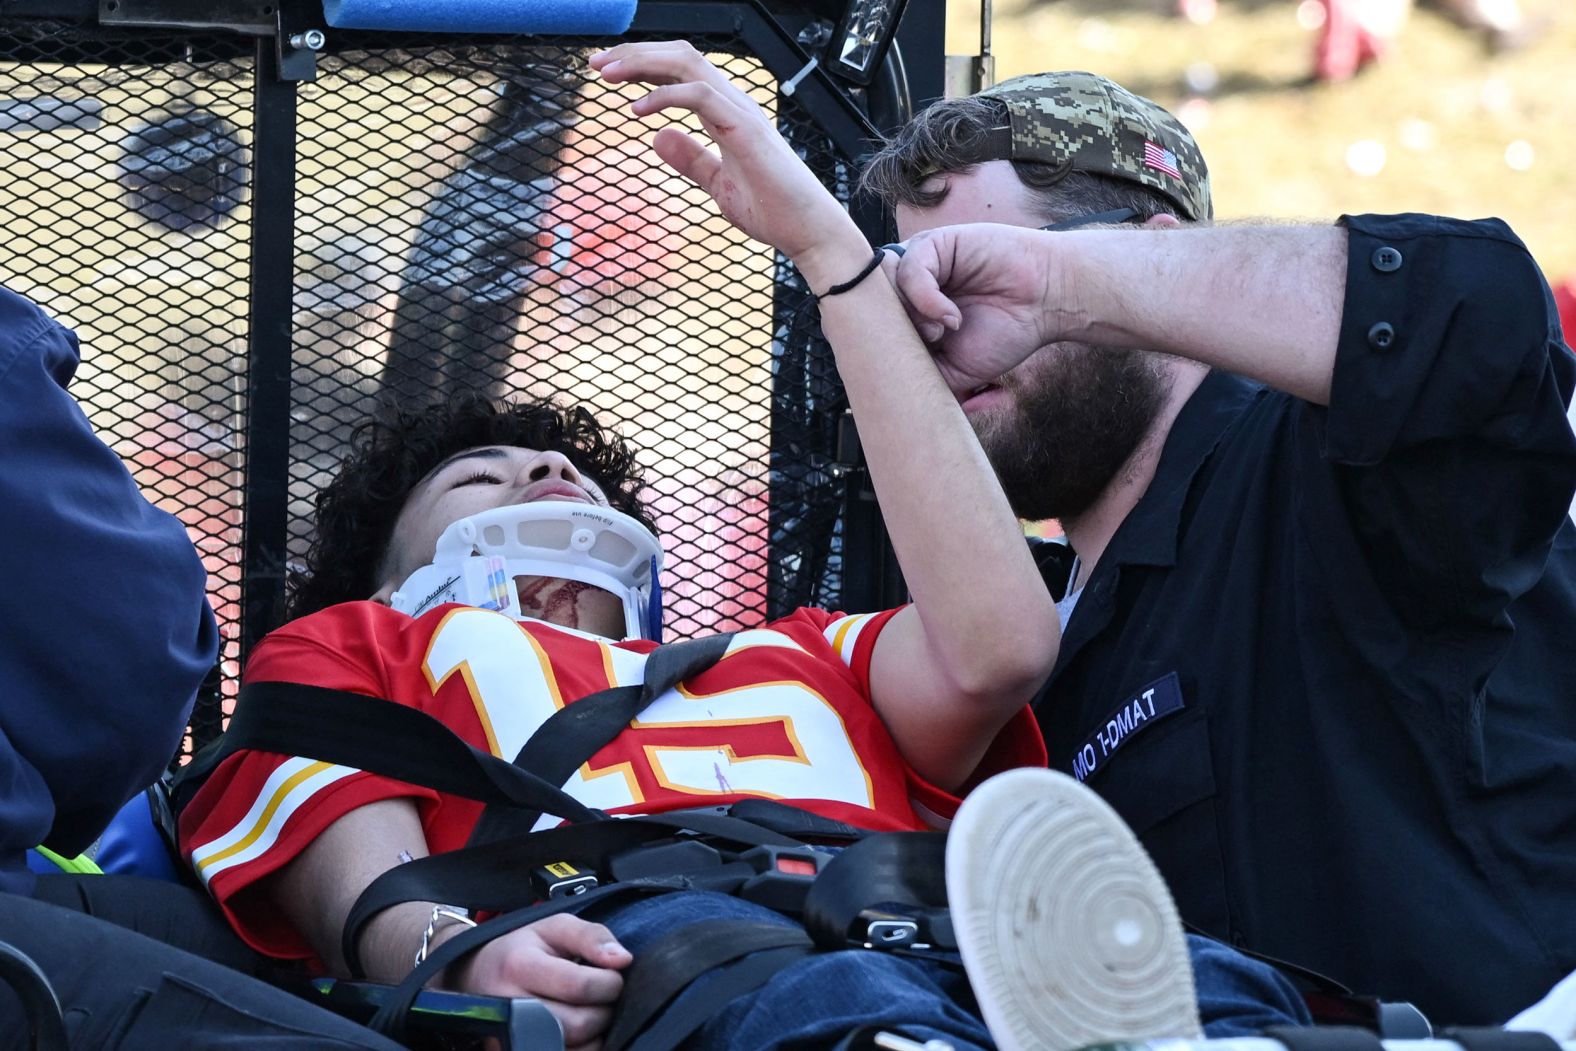 A Kansas City Chiefs fan receives medical treatment after a <a href="index.php?page=&url=http%3A%2F%2Fwww.cnn.com%2F2024%2F02%2F14%2Fus%2Fgallery%2Fkansas-city-parade-shooting%2Findex.html" target="_blank">shooting</a> that occurred right after the team's Super Bowl celebrations on Wednesday, February 14.